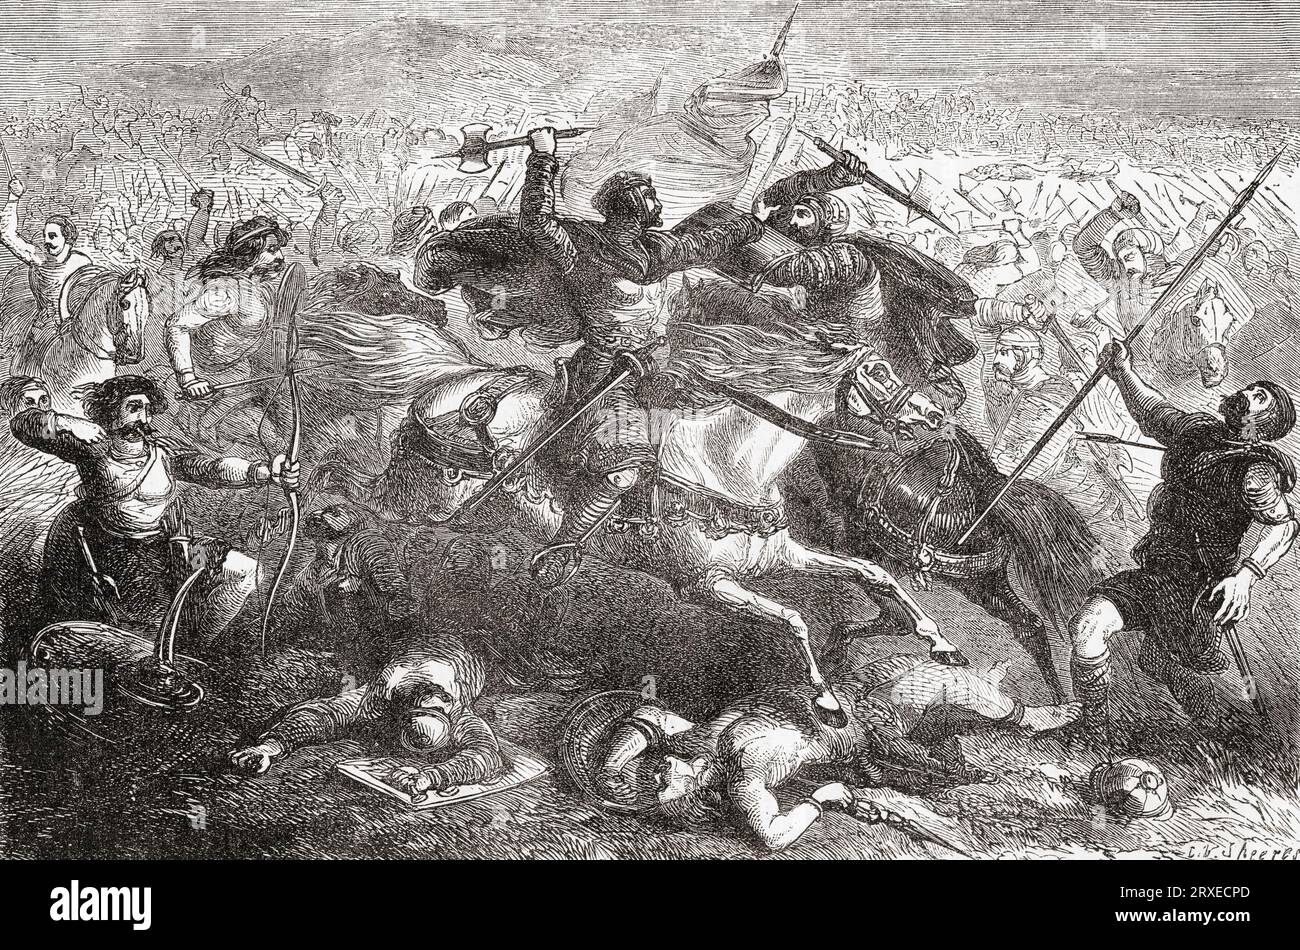 The legendary King Arthur defeating the Saxons at the The Battle of Badon aka Battle of Mons Badonicus. From Cassell's Illustrated History of England, published 1857. Stock Photo